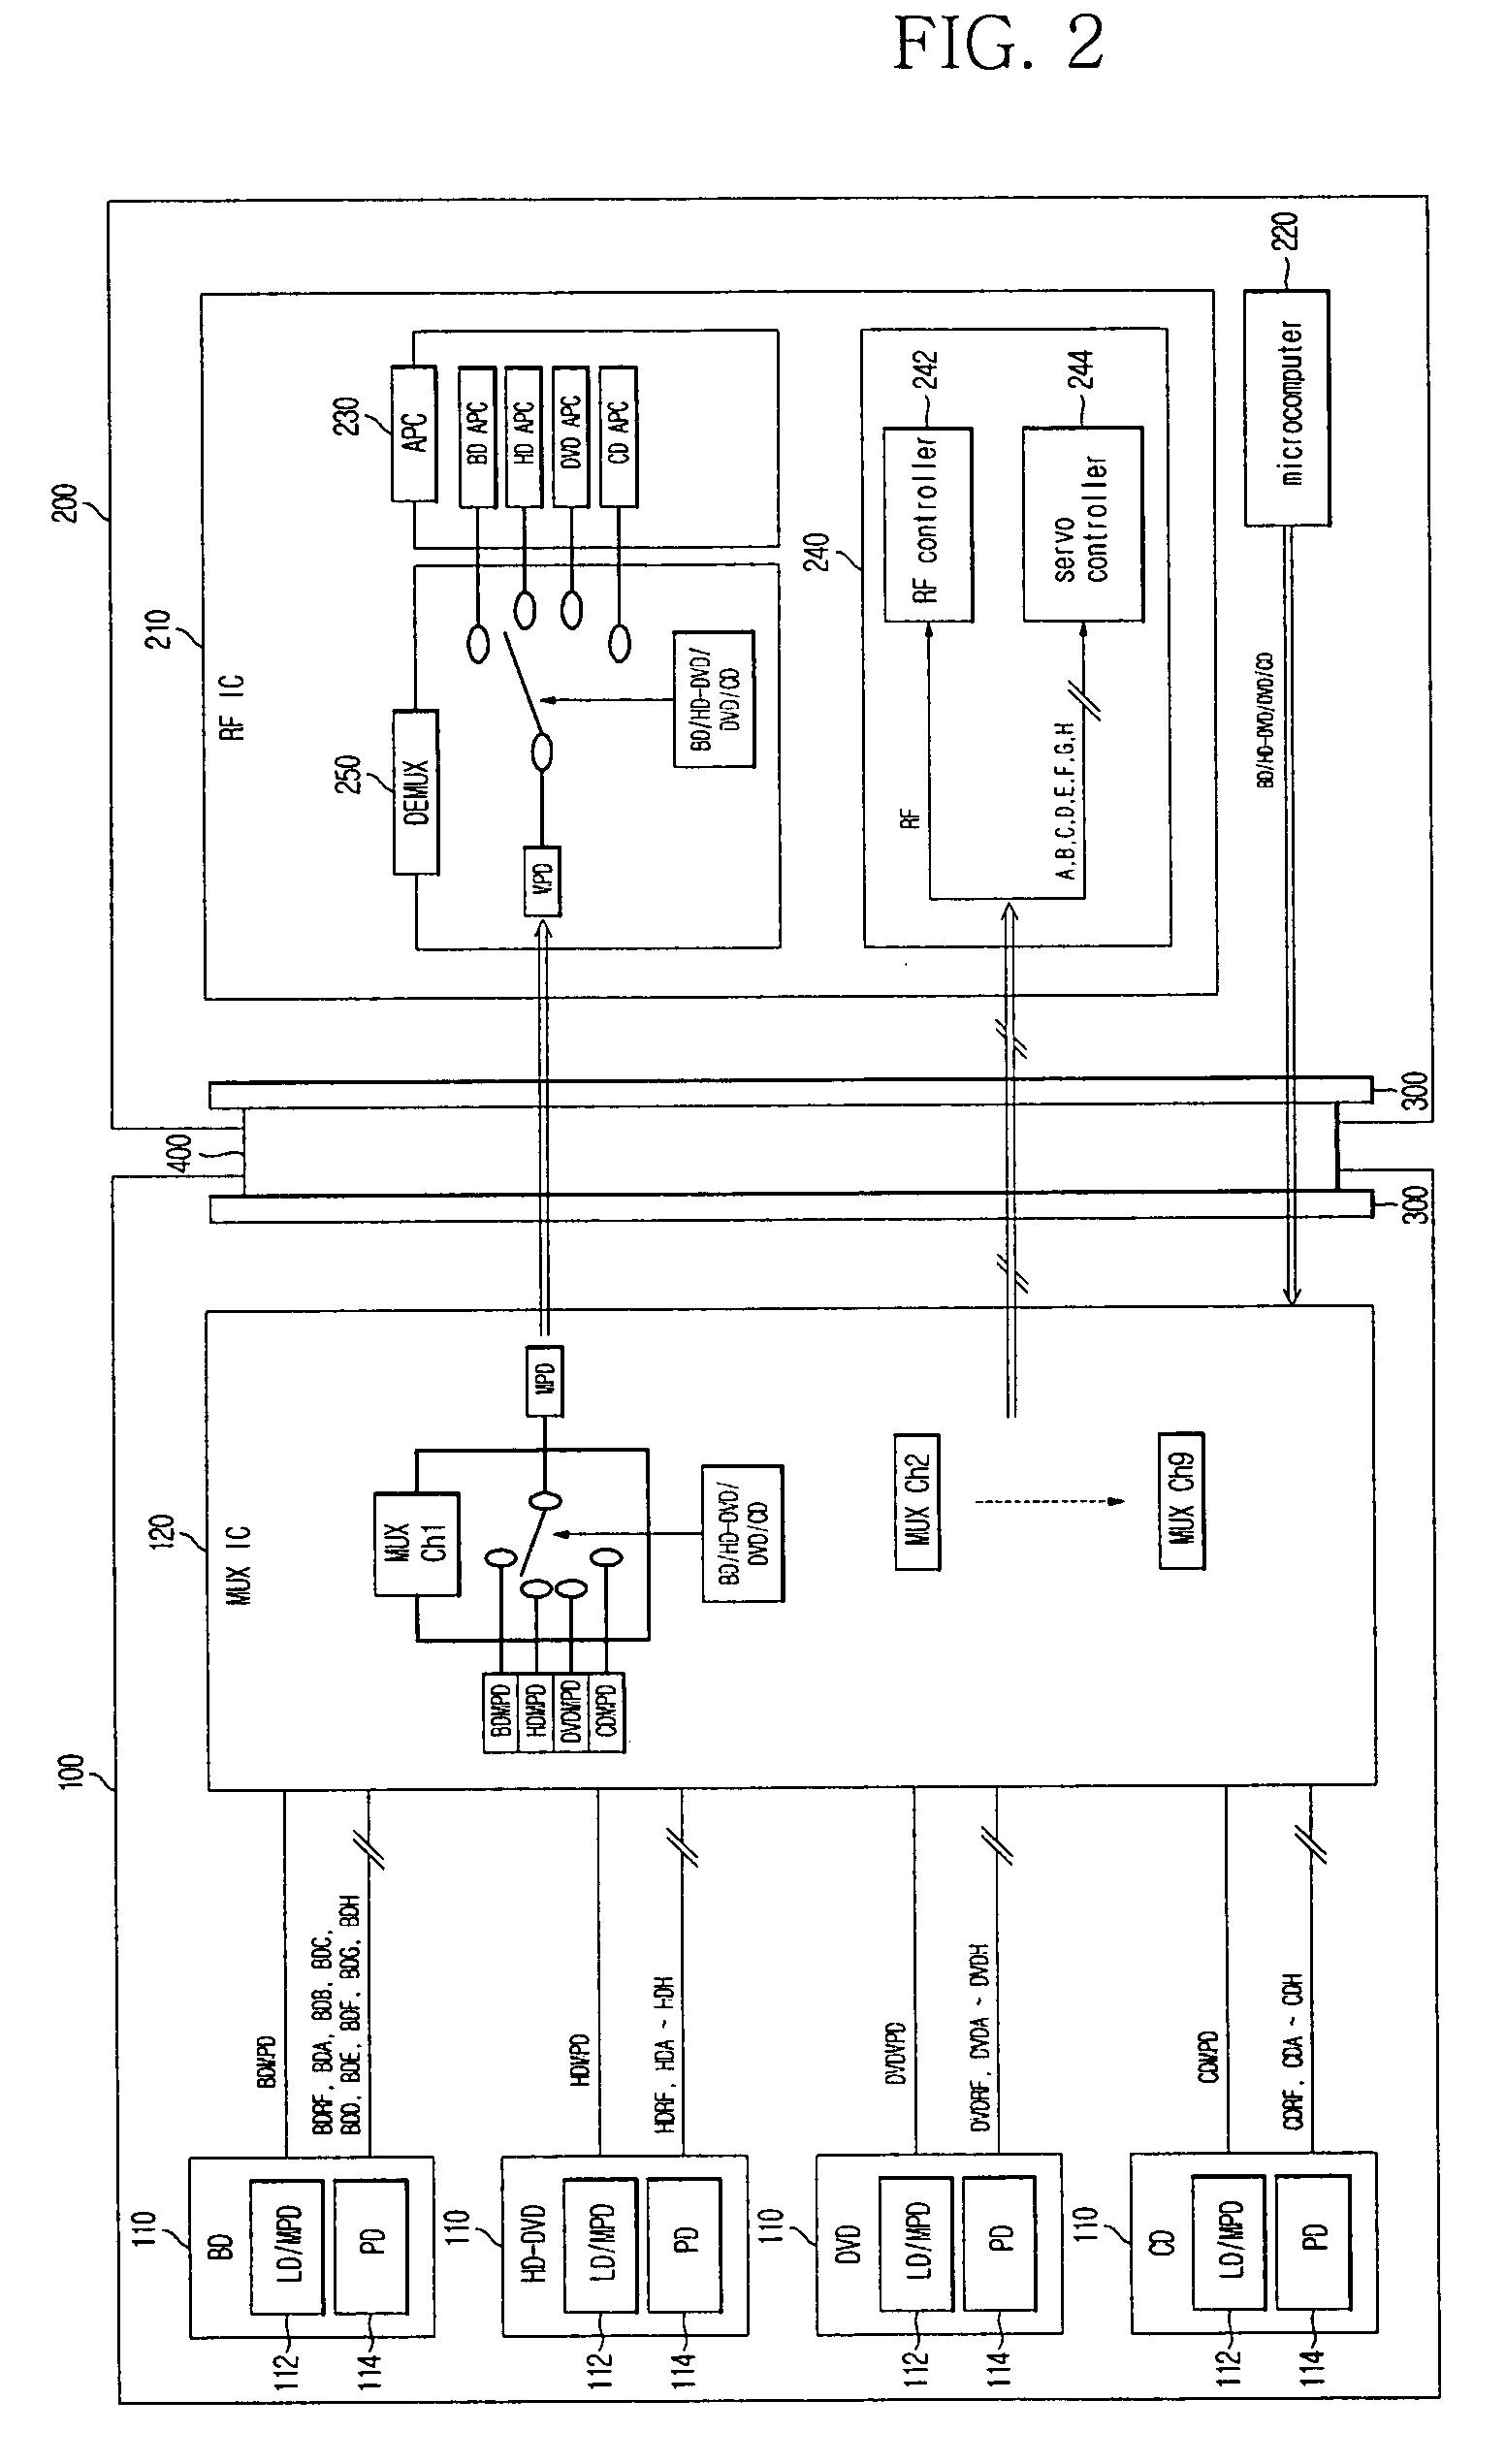 Interface device for optical recording and/or reproducing apparatus